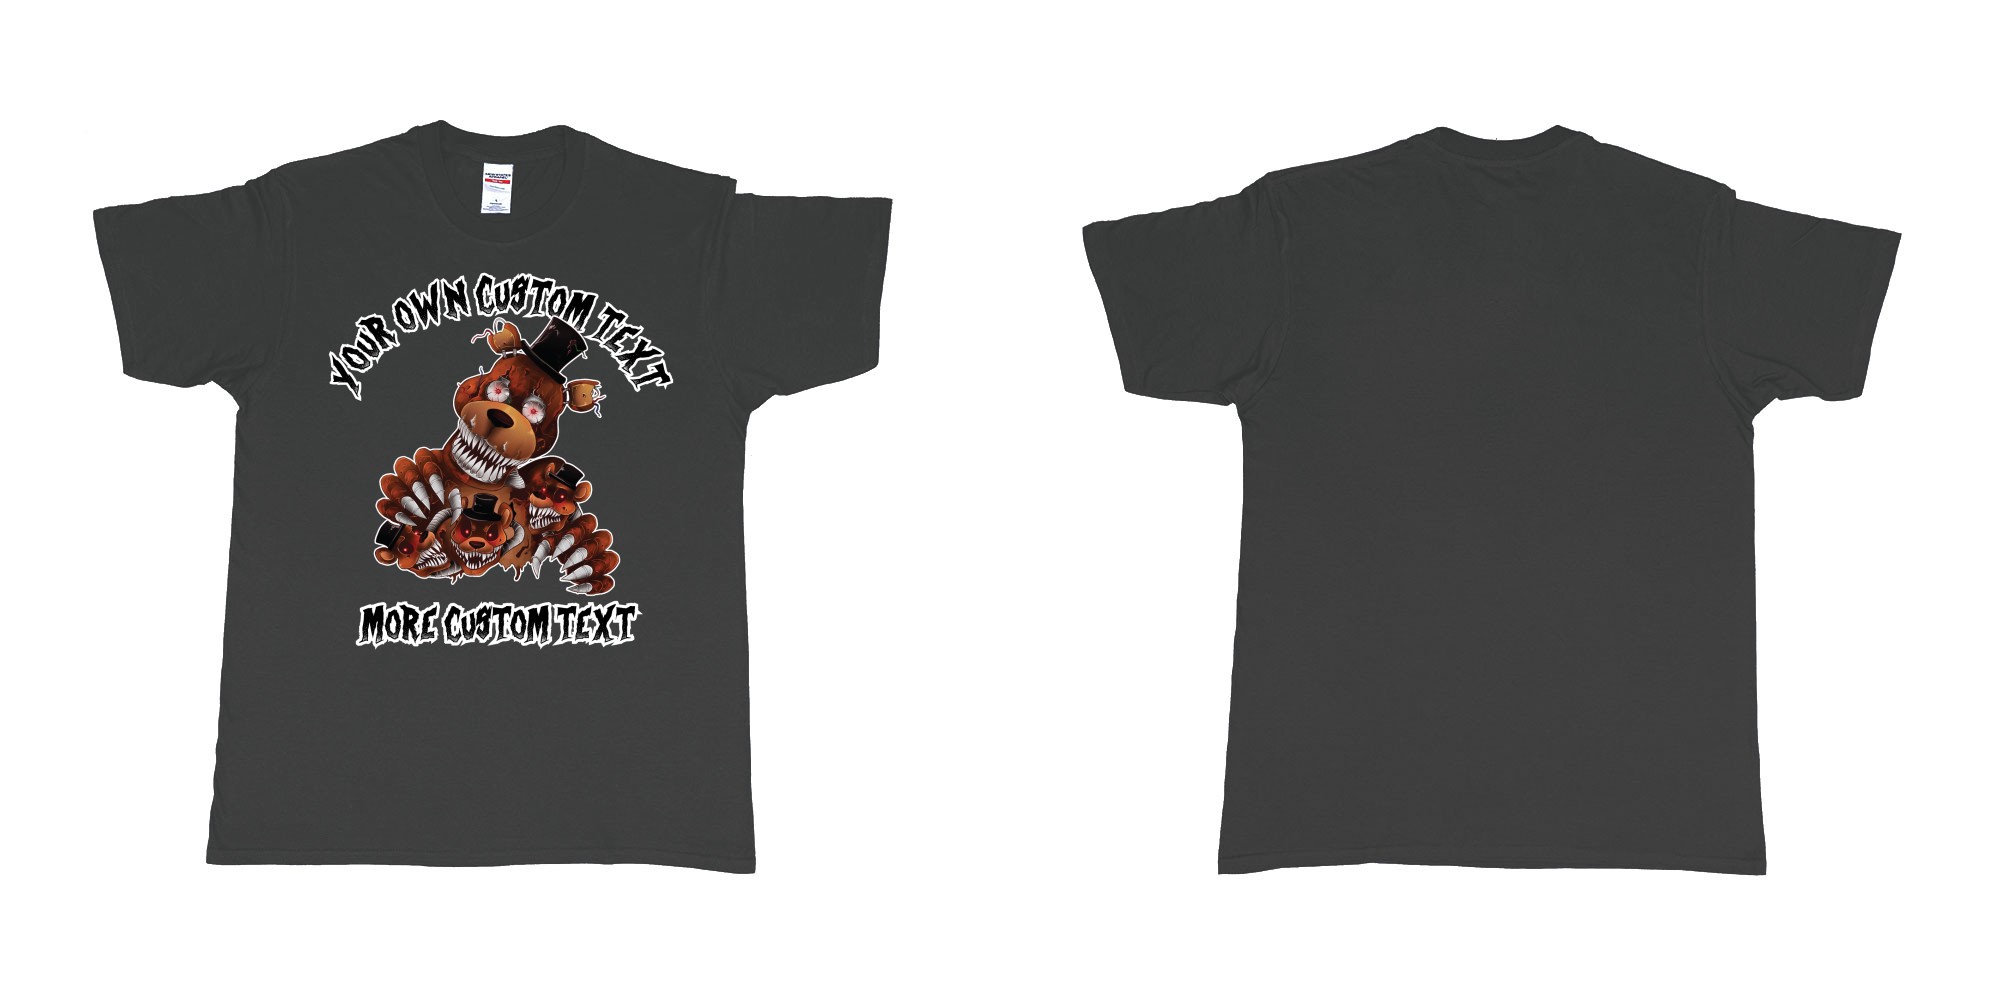 Custom tshirt design five nights at freddy scary bears in fabric color black choice your own text made in Bali by The Pirate Way